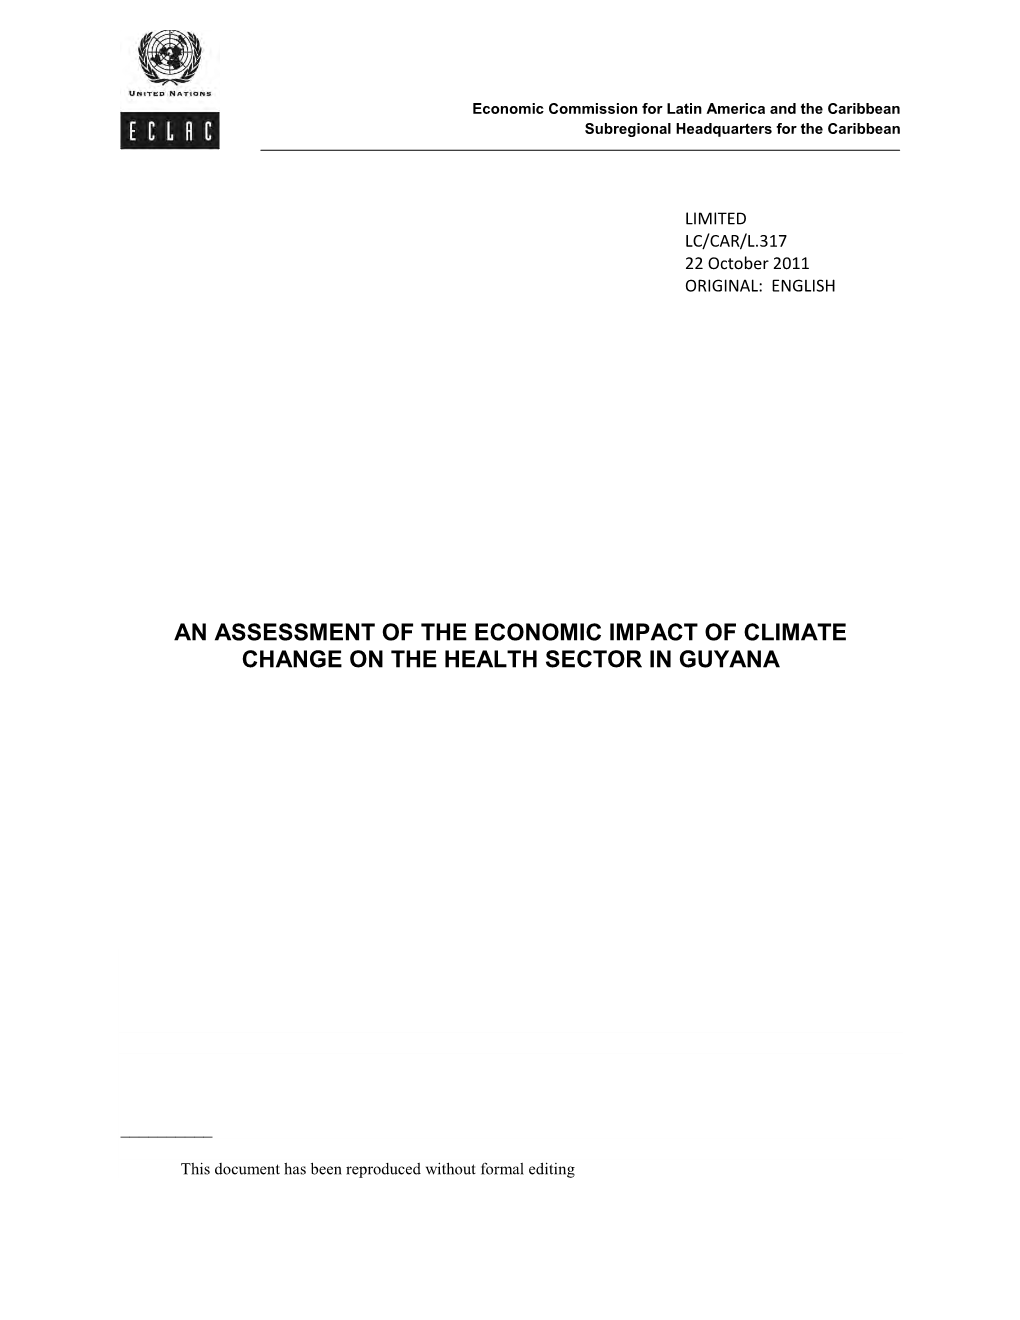 The Economic Impact of Climate Change on Human Health